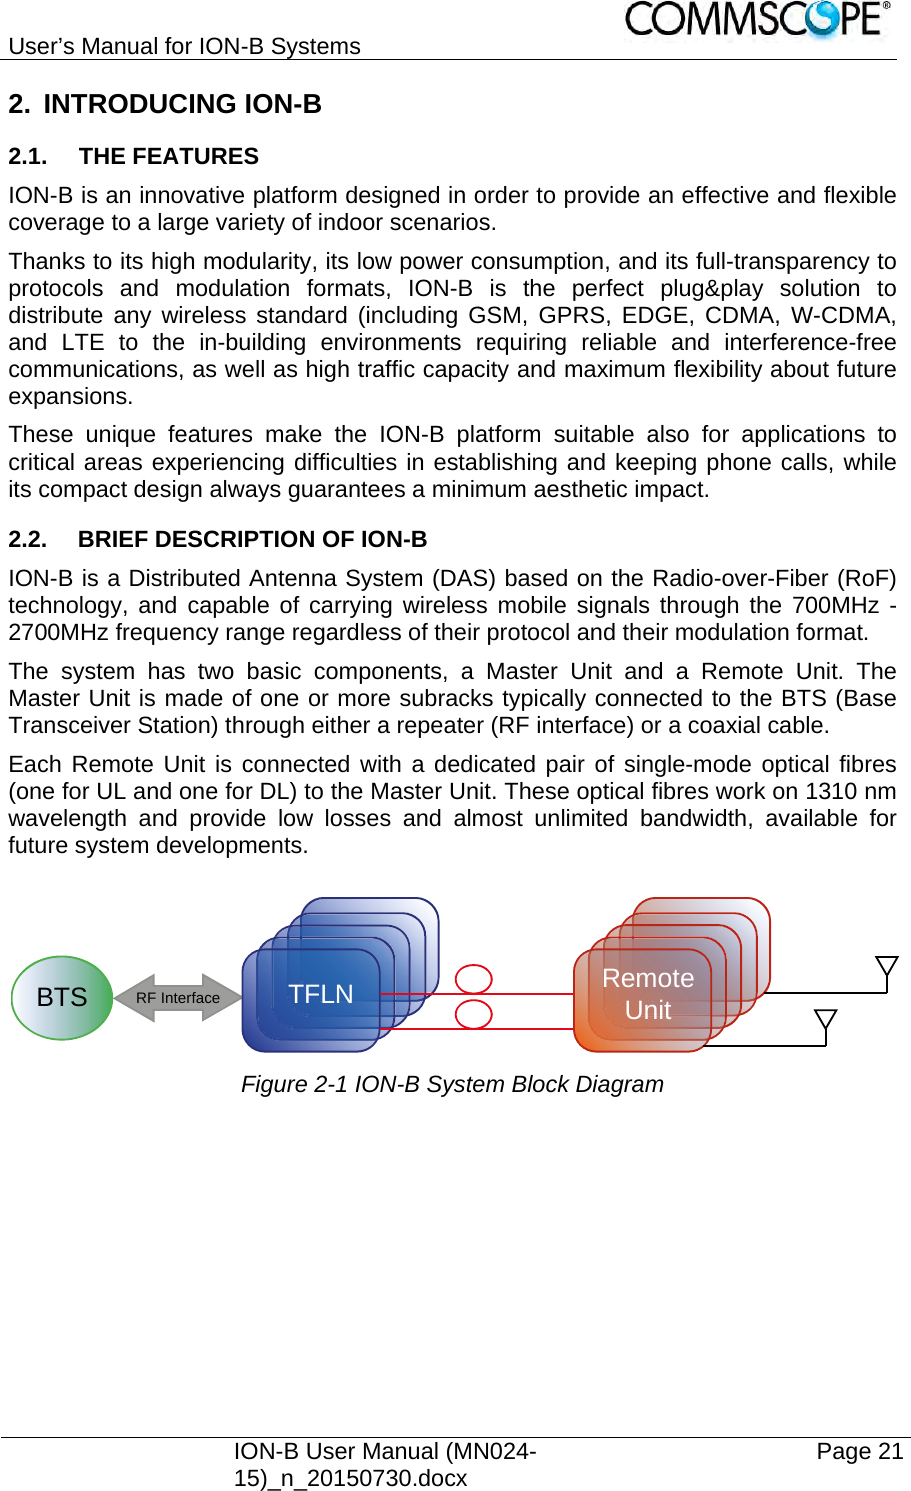 User’s Manual for ION-B Systems    ION-B User Manual (MN024-15)_n_20150730.docx  Page 21 2. INTRODUCING ION-B 2.1. THE FEATURES ION-B is an innovative platform designed in order to provide an effective and flexible coverage to a large variety of indoor scenarios. Thanks to its high modularity, its low power consumption, and its full-transparency to protocols and modulation formats, ION-B is the perfect plug&amp;play solution to distribute any wireless standard (including GSM, GPRS, EDGE, CDMA, W-CDMA, and LTE to the in-building environments requiring reliable and interference-free communications, as well as high traffic capacity and maximum flexibility about future expansions. These unique features make the ION-B platform suitable also for applications to critical areas experiencing difficulties in establishing and keeping phone calls, while its compact design always guarantees a minimum aesthetic impact. 2.2.  BRIEF DESCRIPTION OF ION-B ION-B is a Distributed Antenna System (DAS) based on the Radio-over-Fiber (RoF) technology, and capable of carrying wireless mobile signals through the 700MHz - 2700MHz frequency range regardless of their protocol and their modulation format. The system has two basic components, a Master Unit and a Remote Unit. The Master Unit is made of one or more subracks typically connected to the BTS (Base Transceiver Station) through either a repeater (RF interface) or a coaxial cable. Each Remote Unit is connected with a dedicated pair of single-mode optical fibres (one for UL and one for DL) to the Master Unit. These optical fibres work on 1310 nm wavelength and provide low losses and almost unlimited bandwidth, available for future system developments.   Figure 2-1 ION-B System Block Diagram BTSRF InterfaceTFLN RemoteUnit